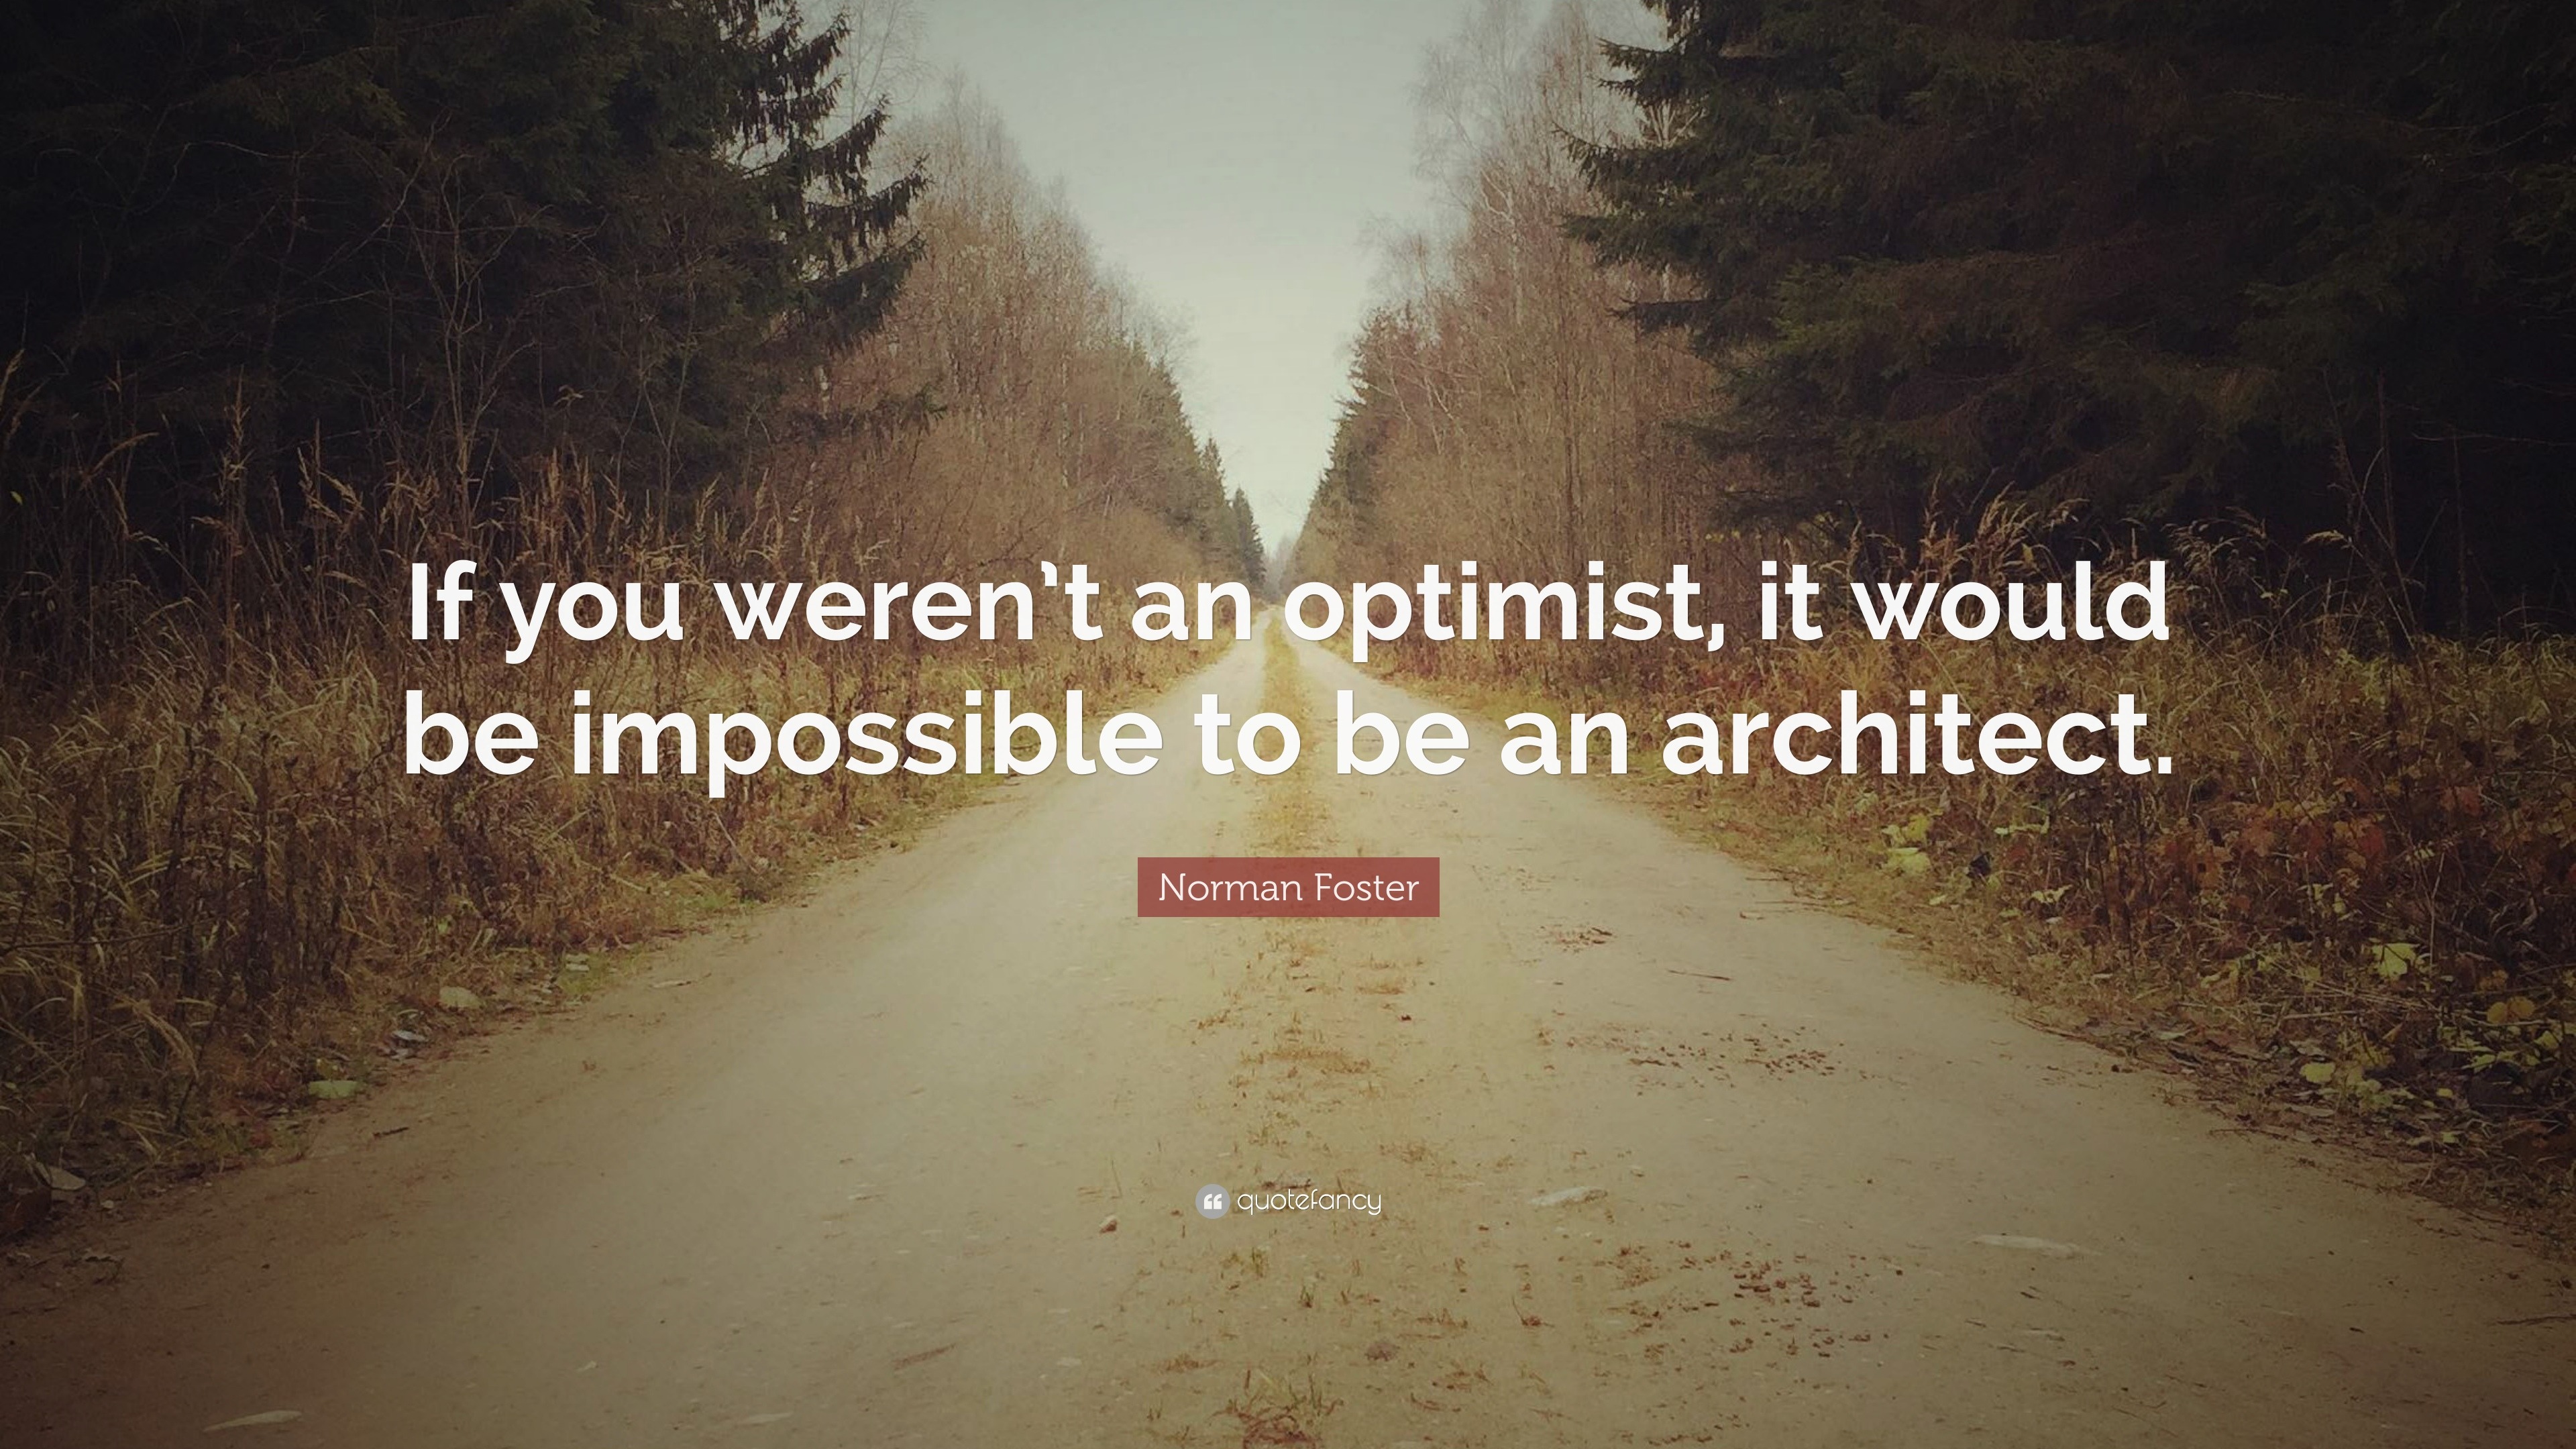 Norman Foster Quote: “If you weren’t an optimist, it would be ...